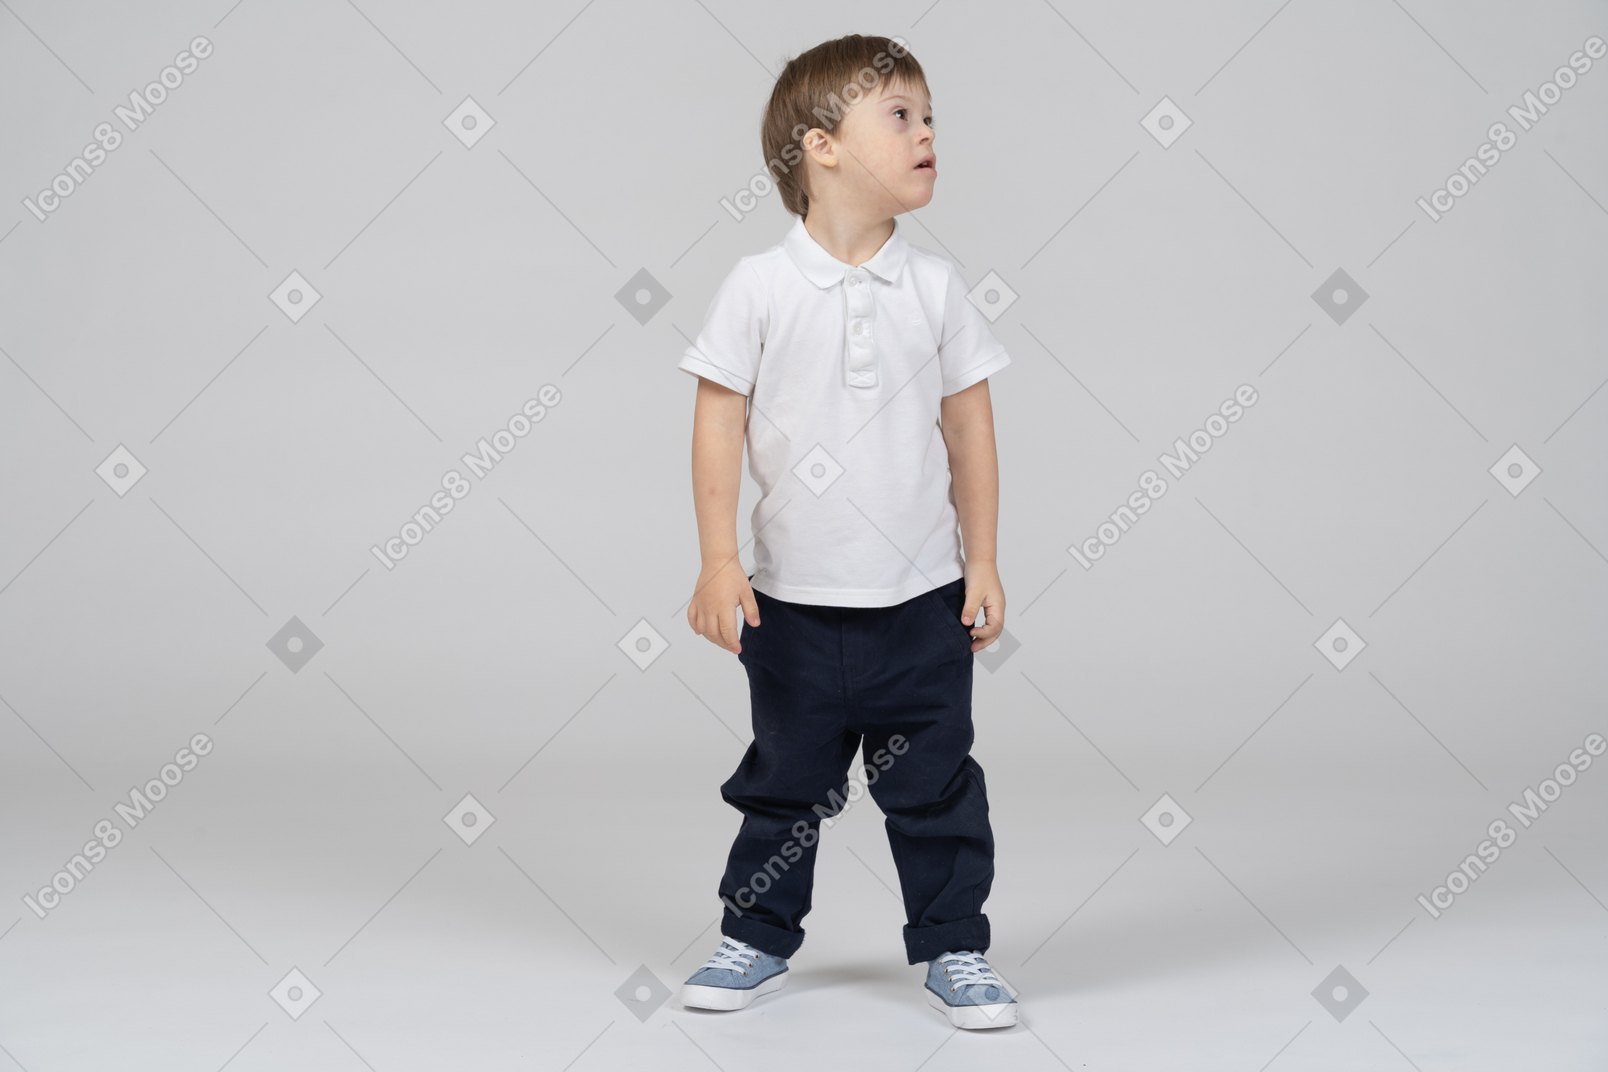 Little boy standing with his head turned